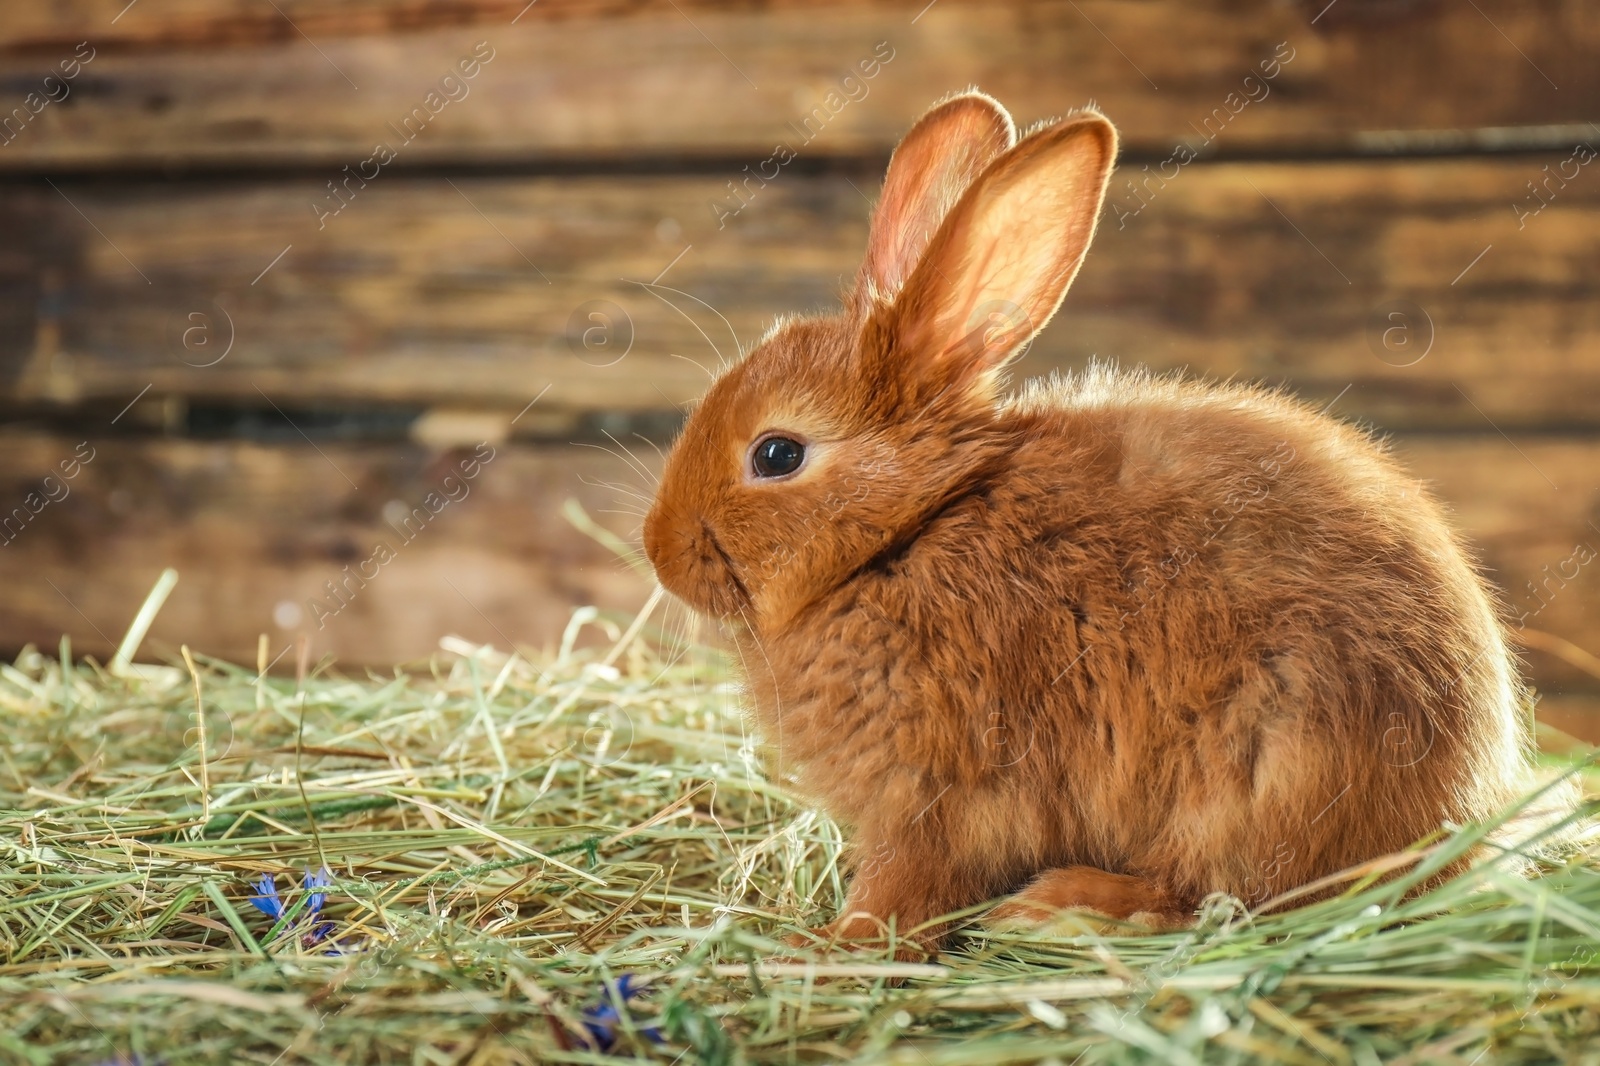 Photo of Adorable red bunny on straw against blurred background